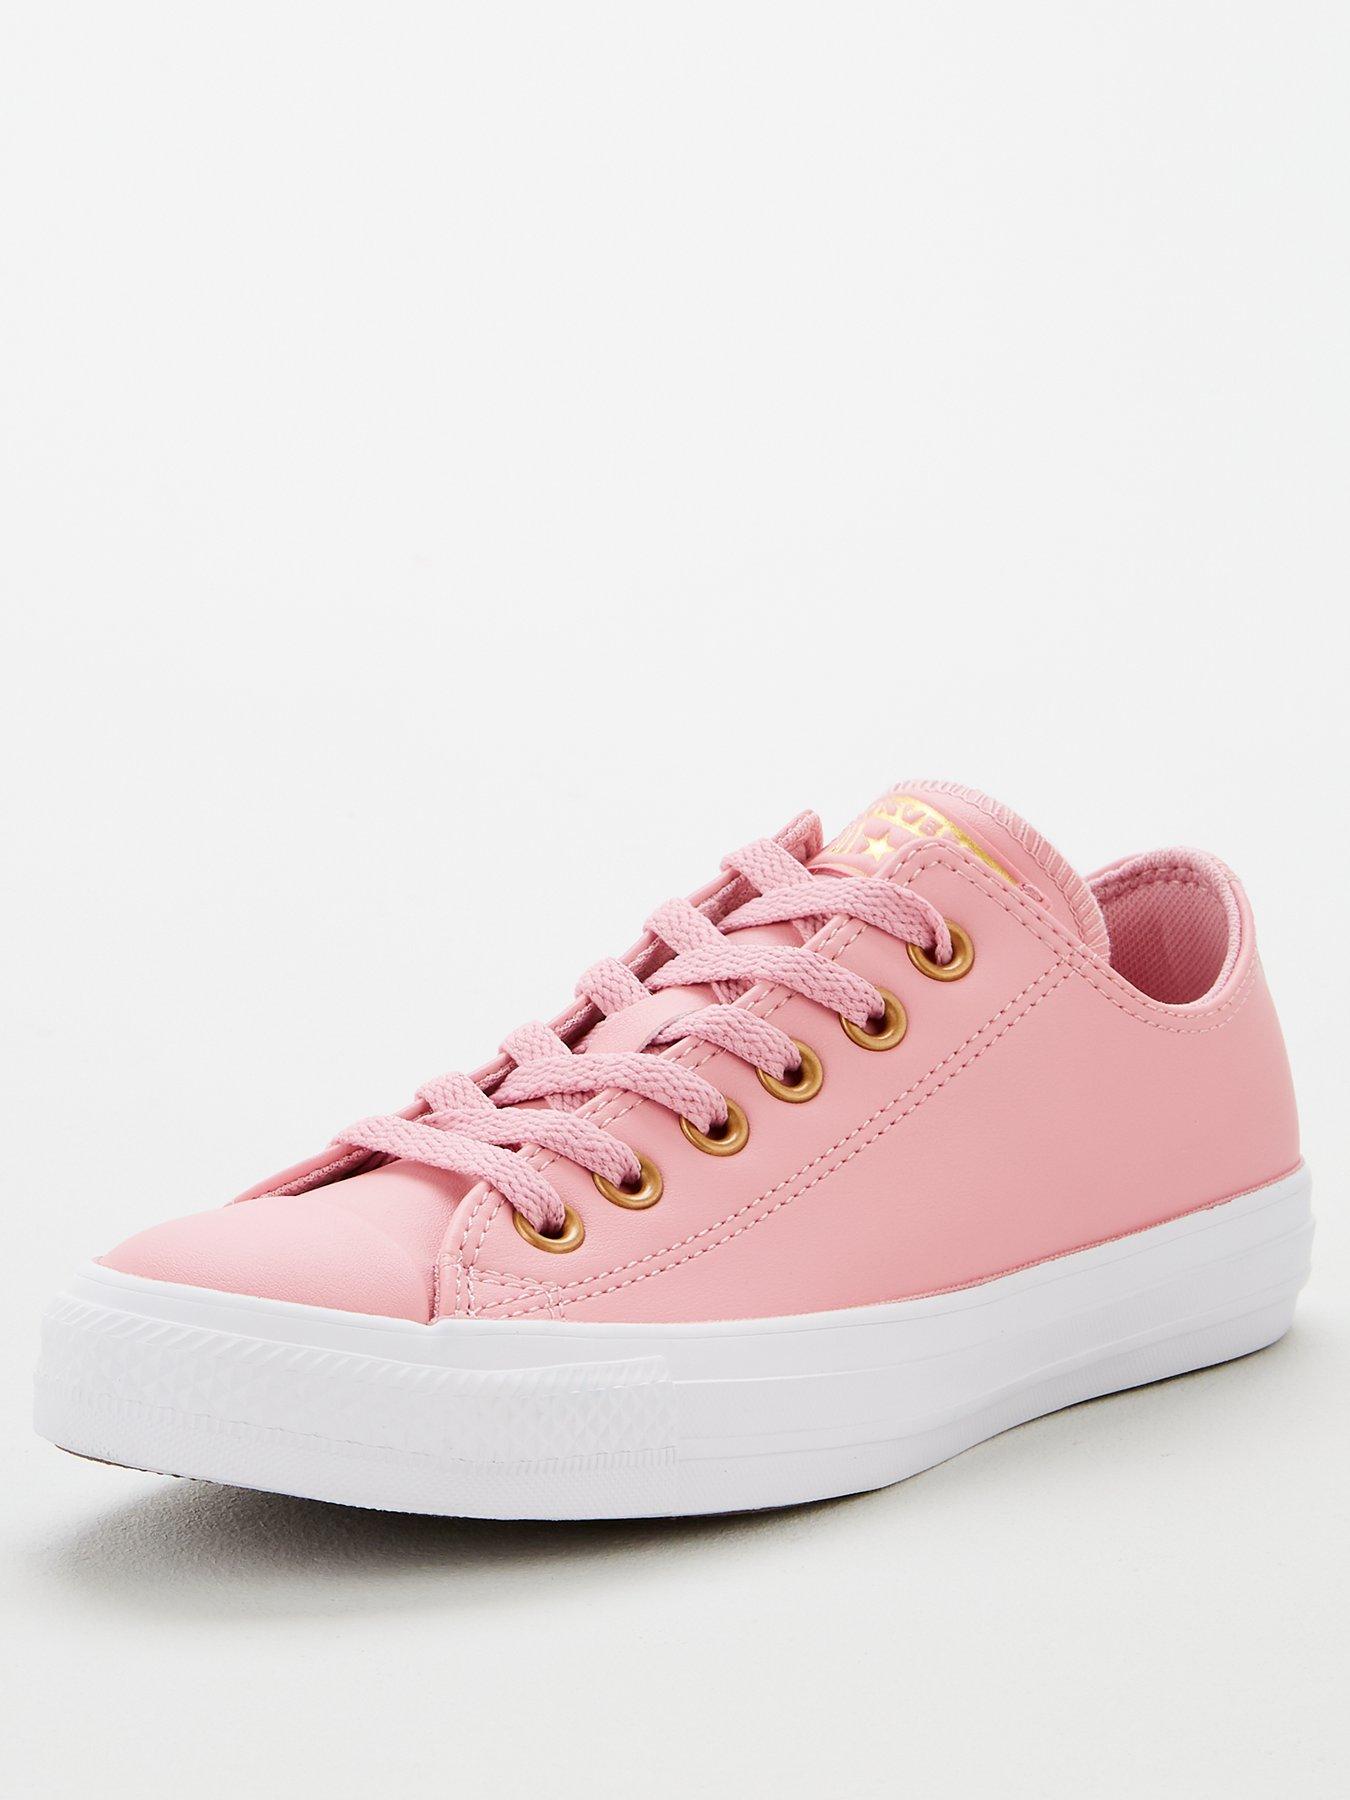 all pink leather converse